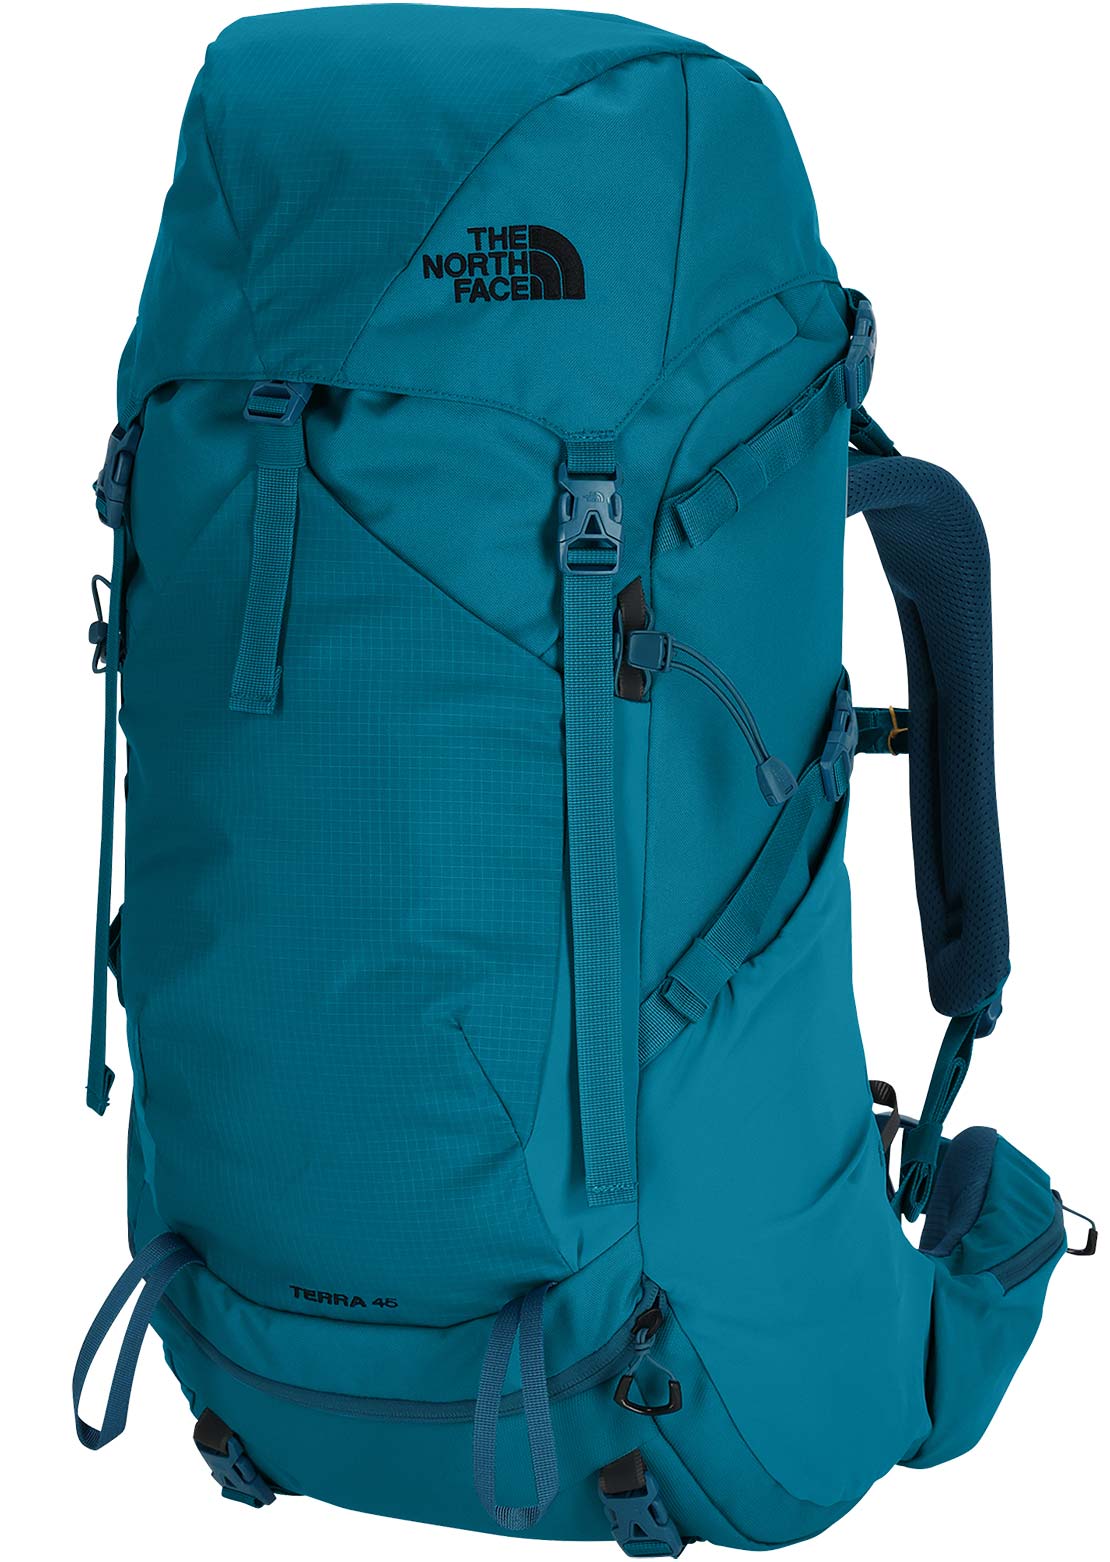 The North Face Junior Terra 50 Backpack Sapphire Slate/Blue Moss